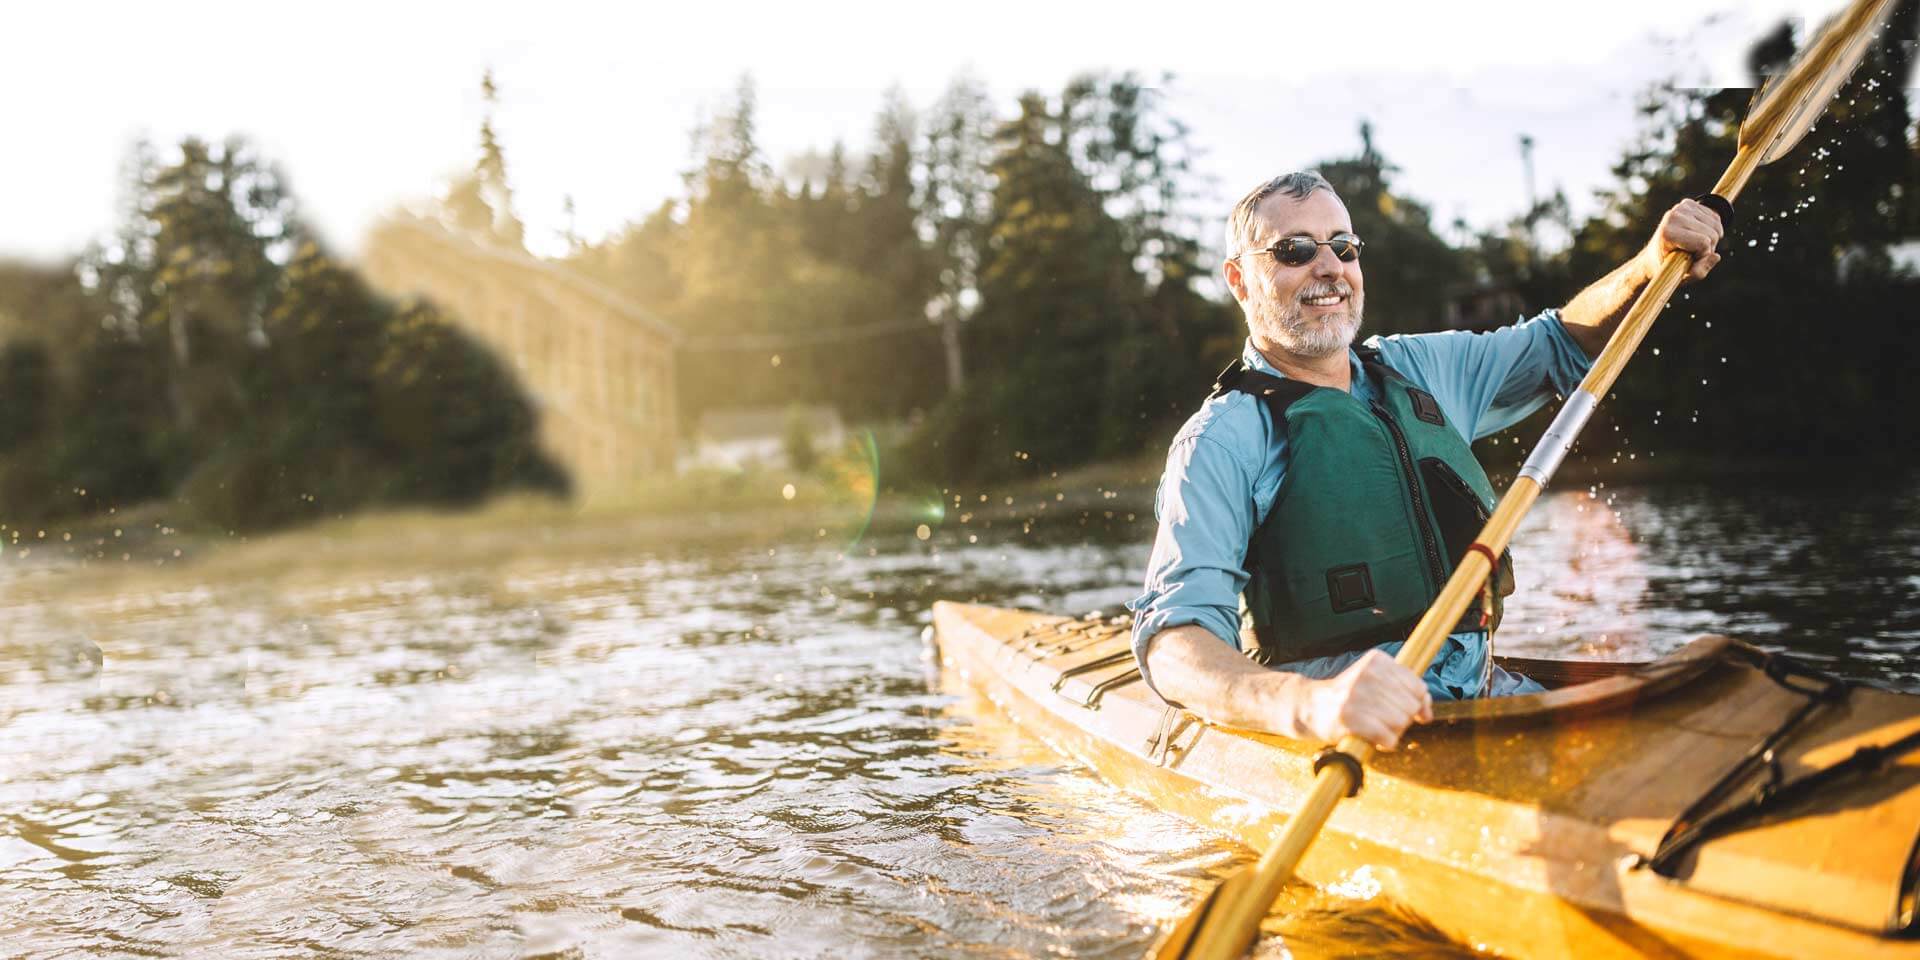 A middle aged man paddling a kayak who is a Money Market account customer